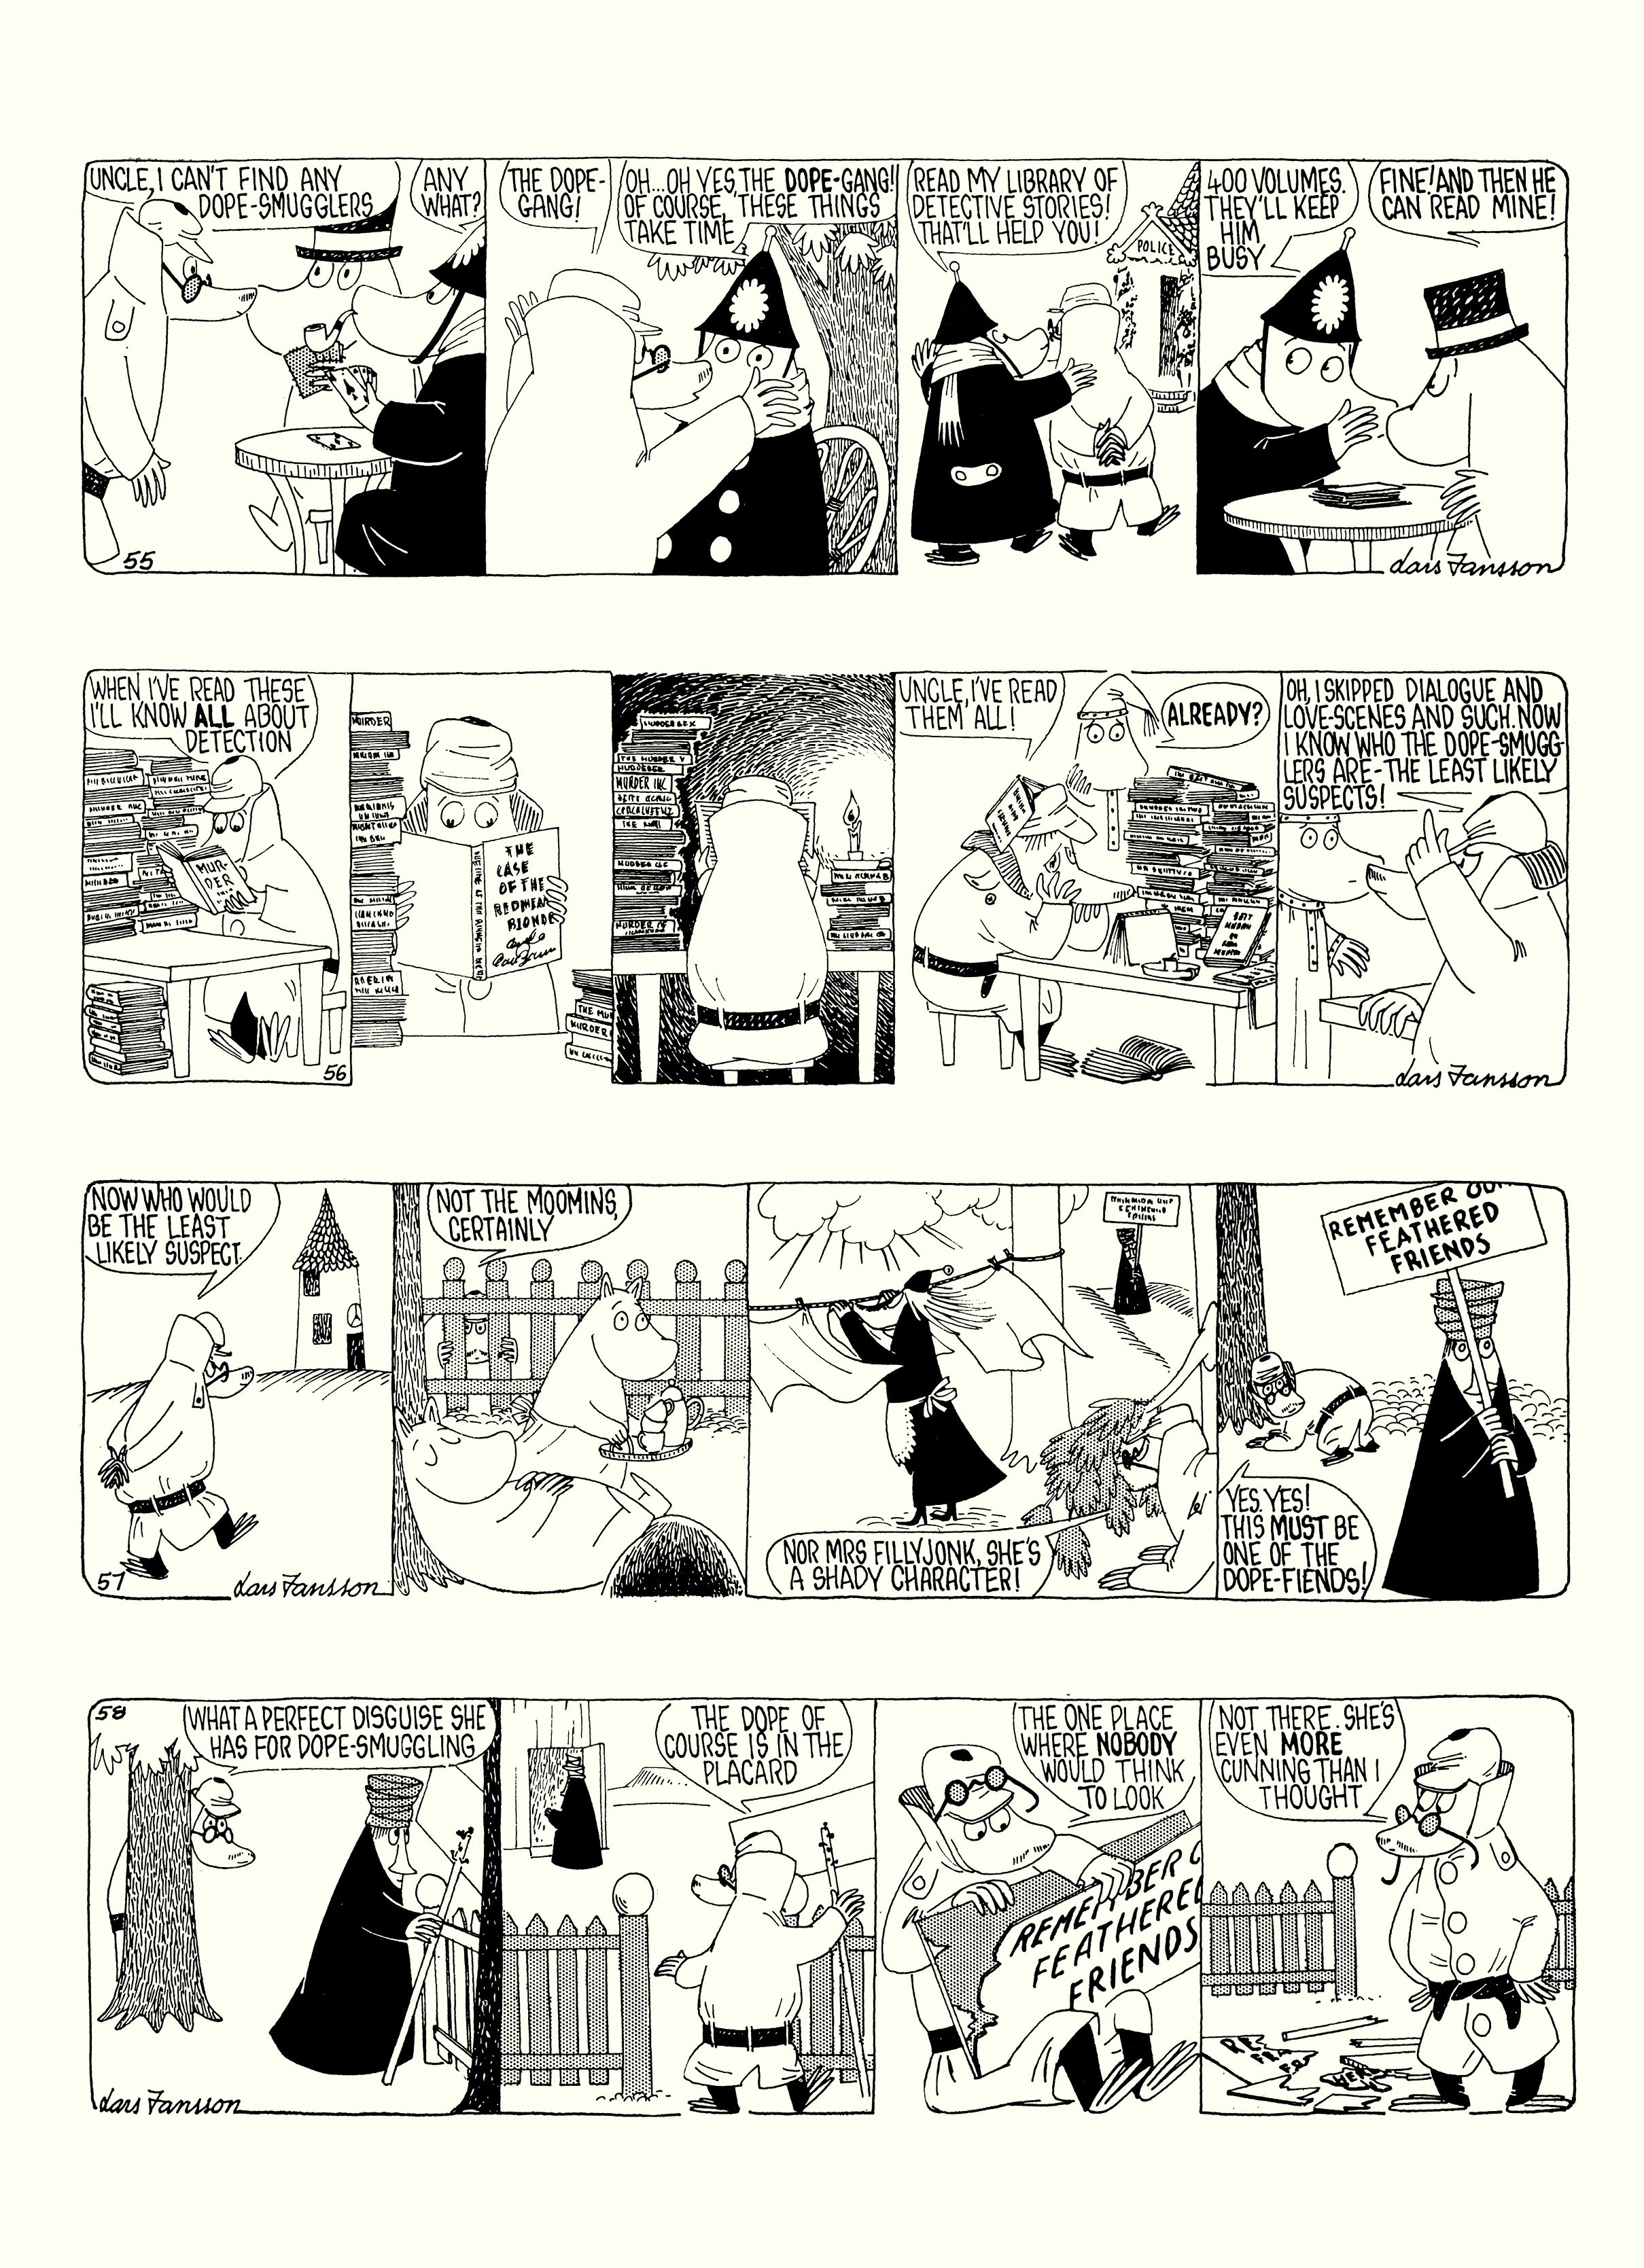 Read online Moomin: The Complete Lars Jansson Comic Strip comic -  Issue # TPB 8 - 85